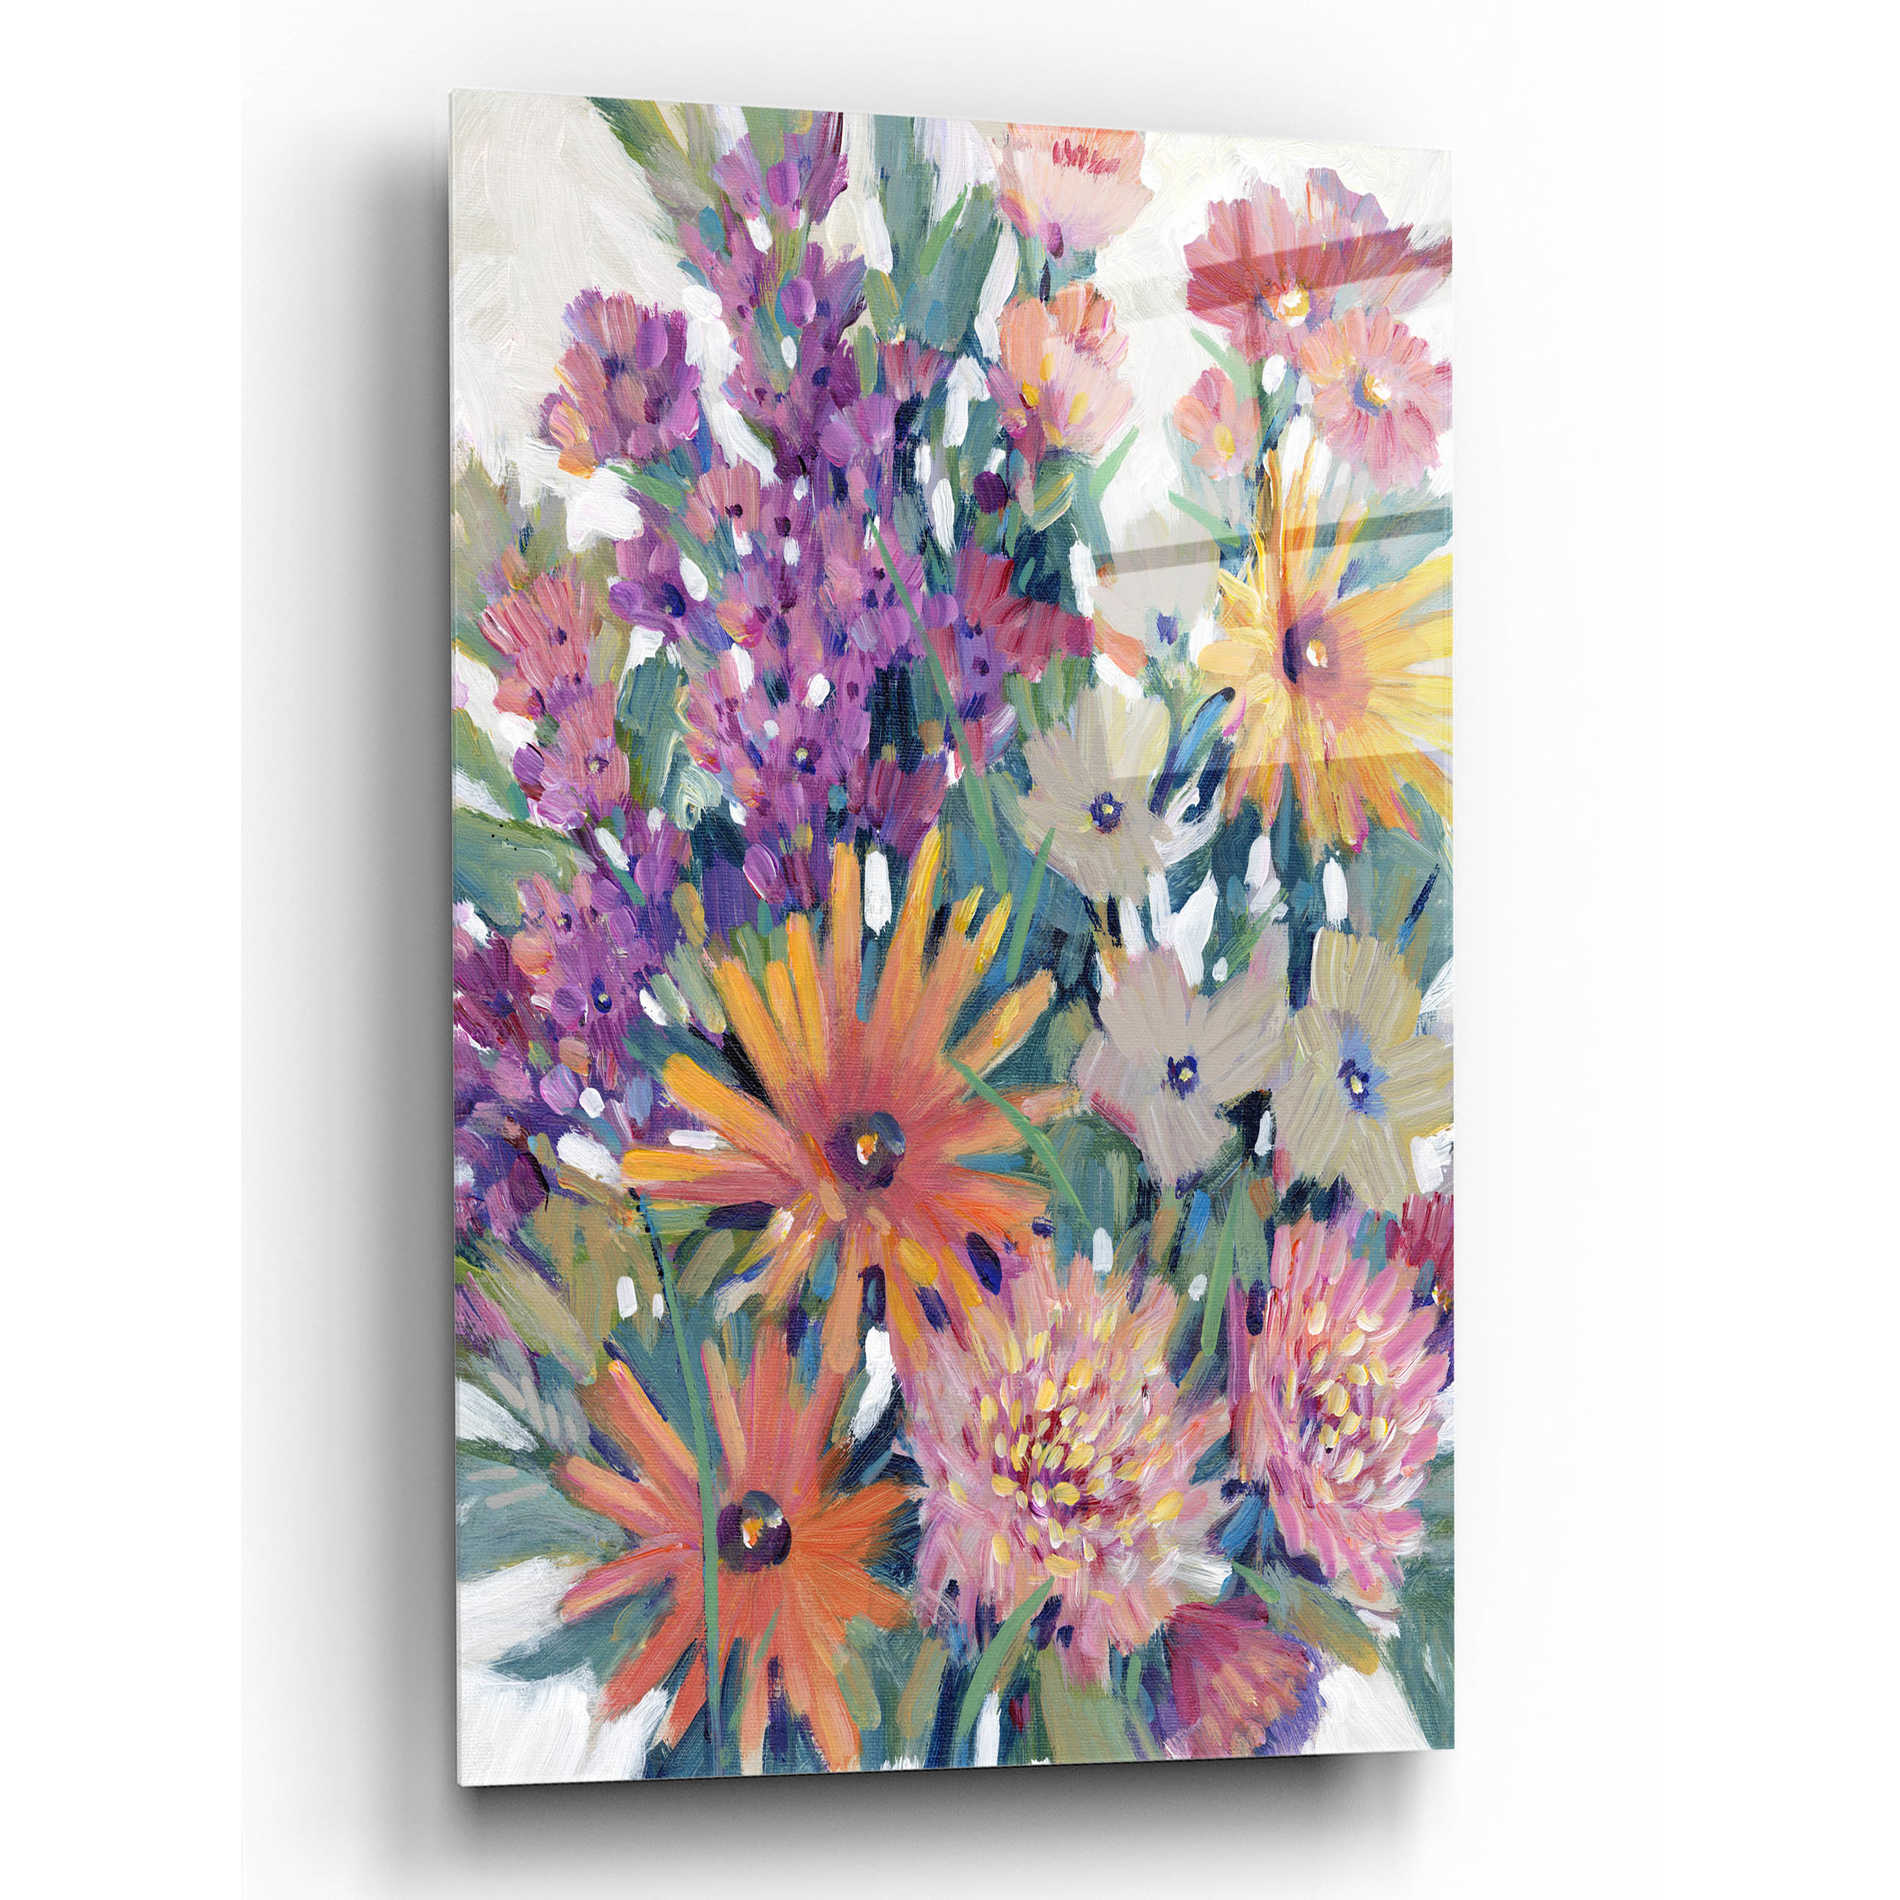 Epic Art 'Spring in Bloom II' by Tim O'Toole, Acrylic Glass Wall Art